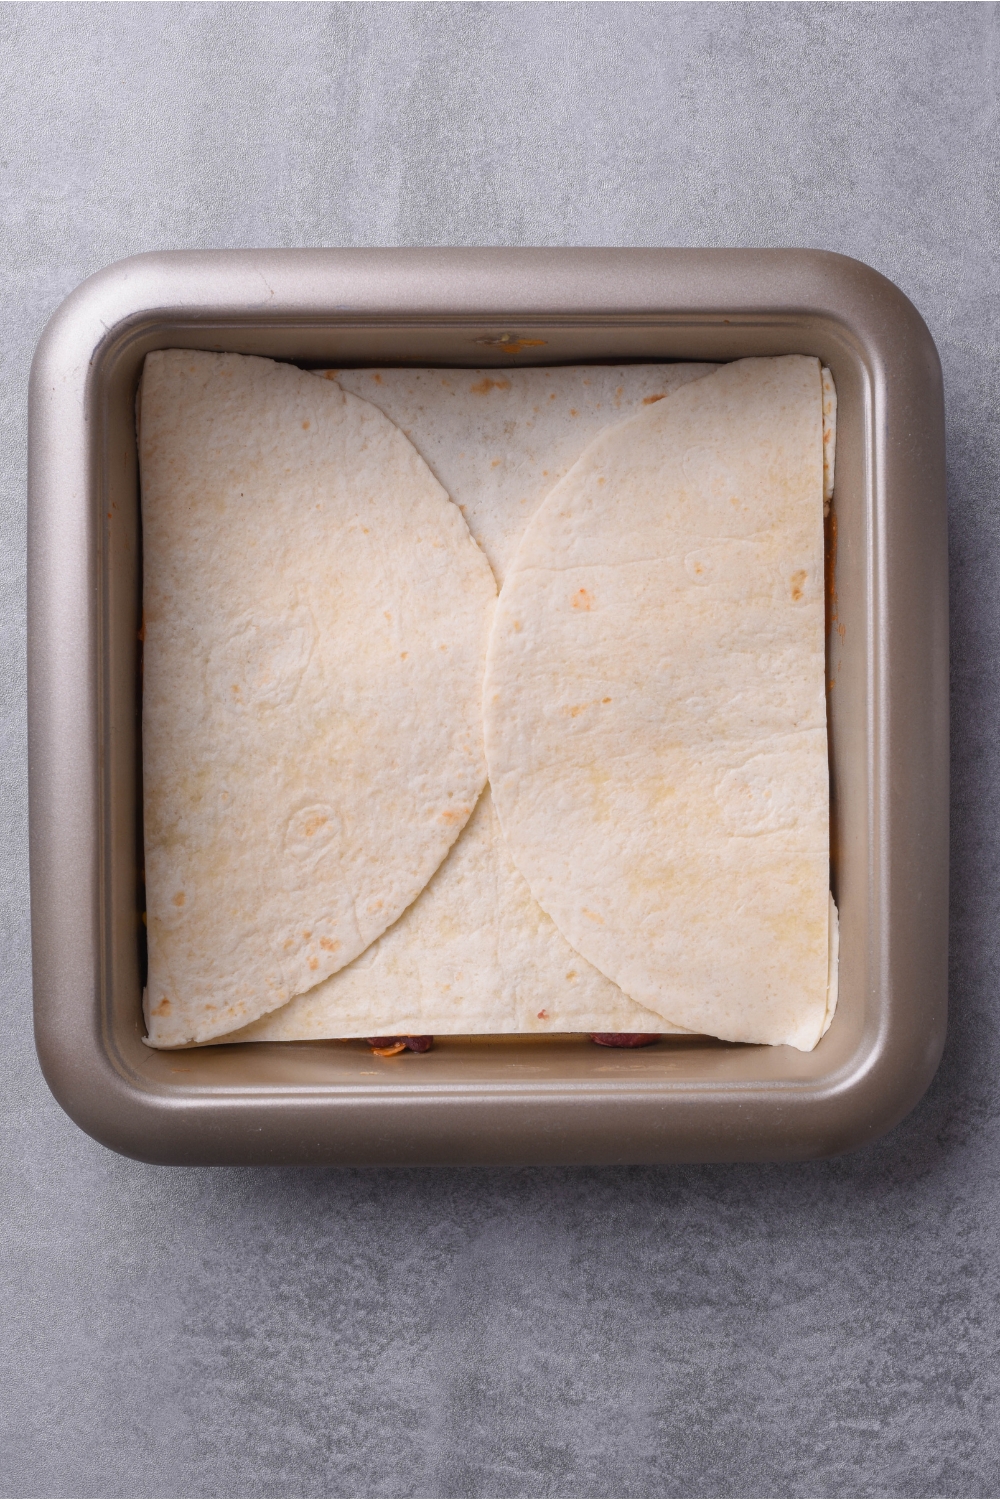 Square baking dish with a layer of tortillas that have been cut in half to fully cover the baking dish.